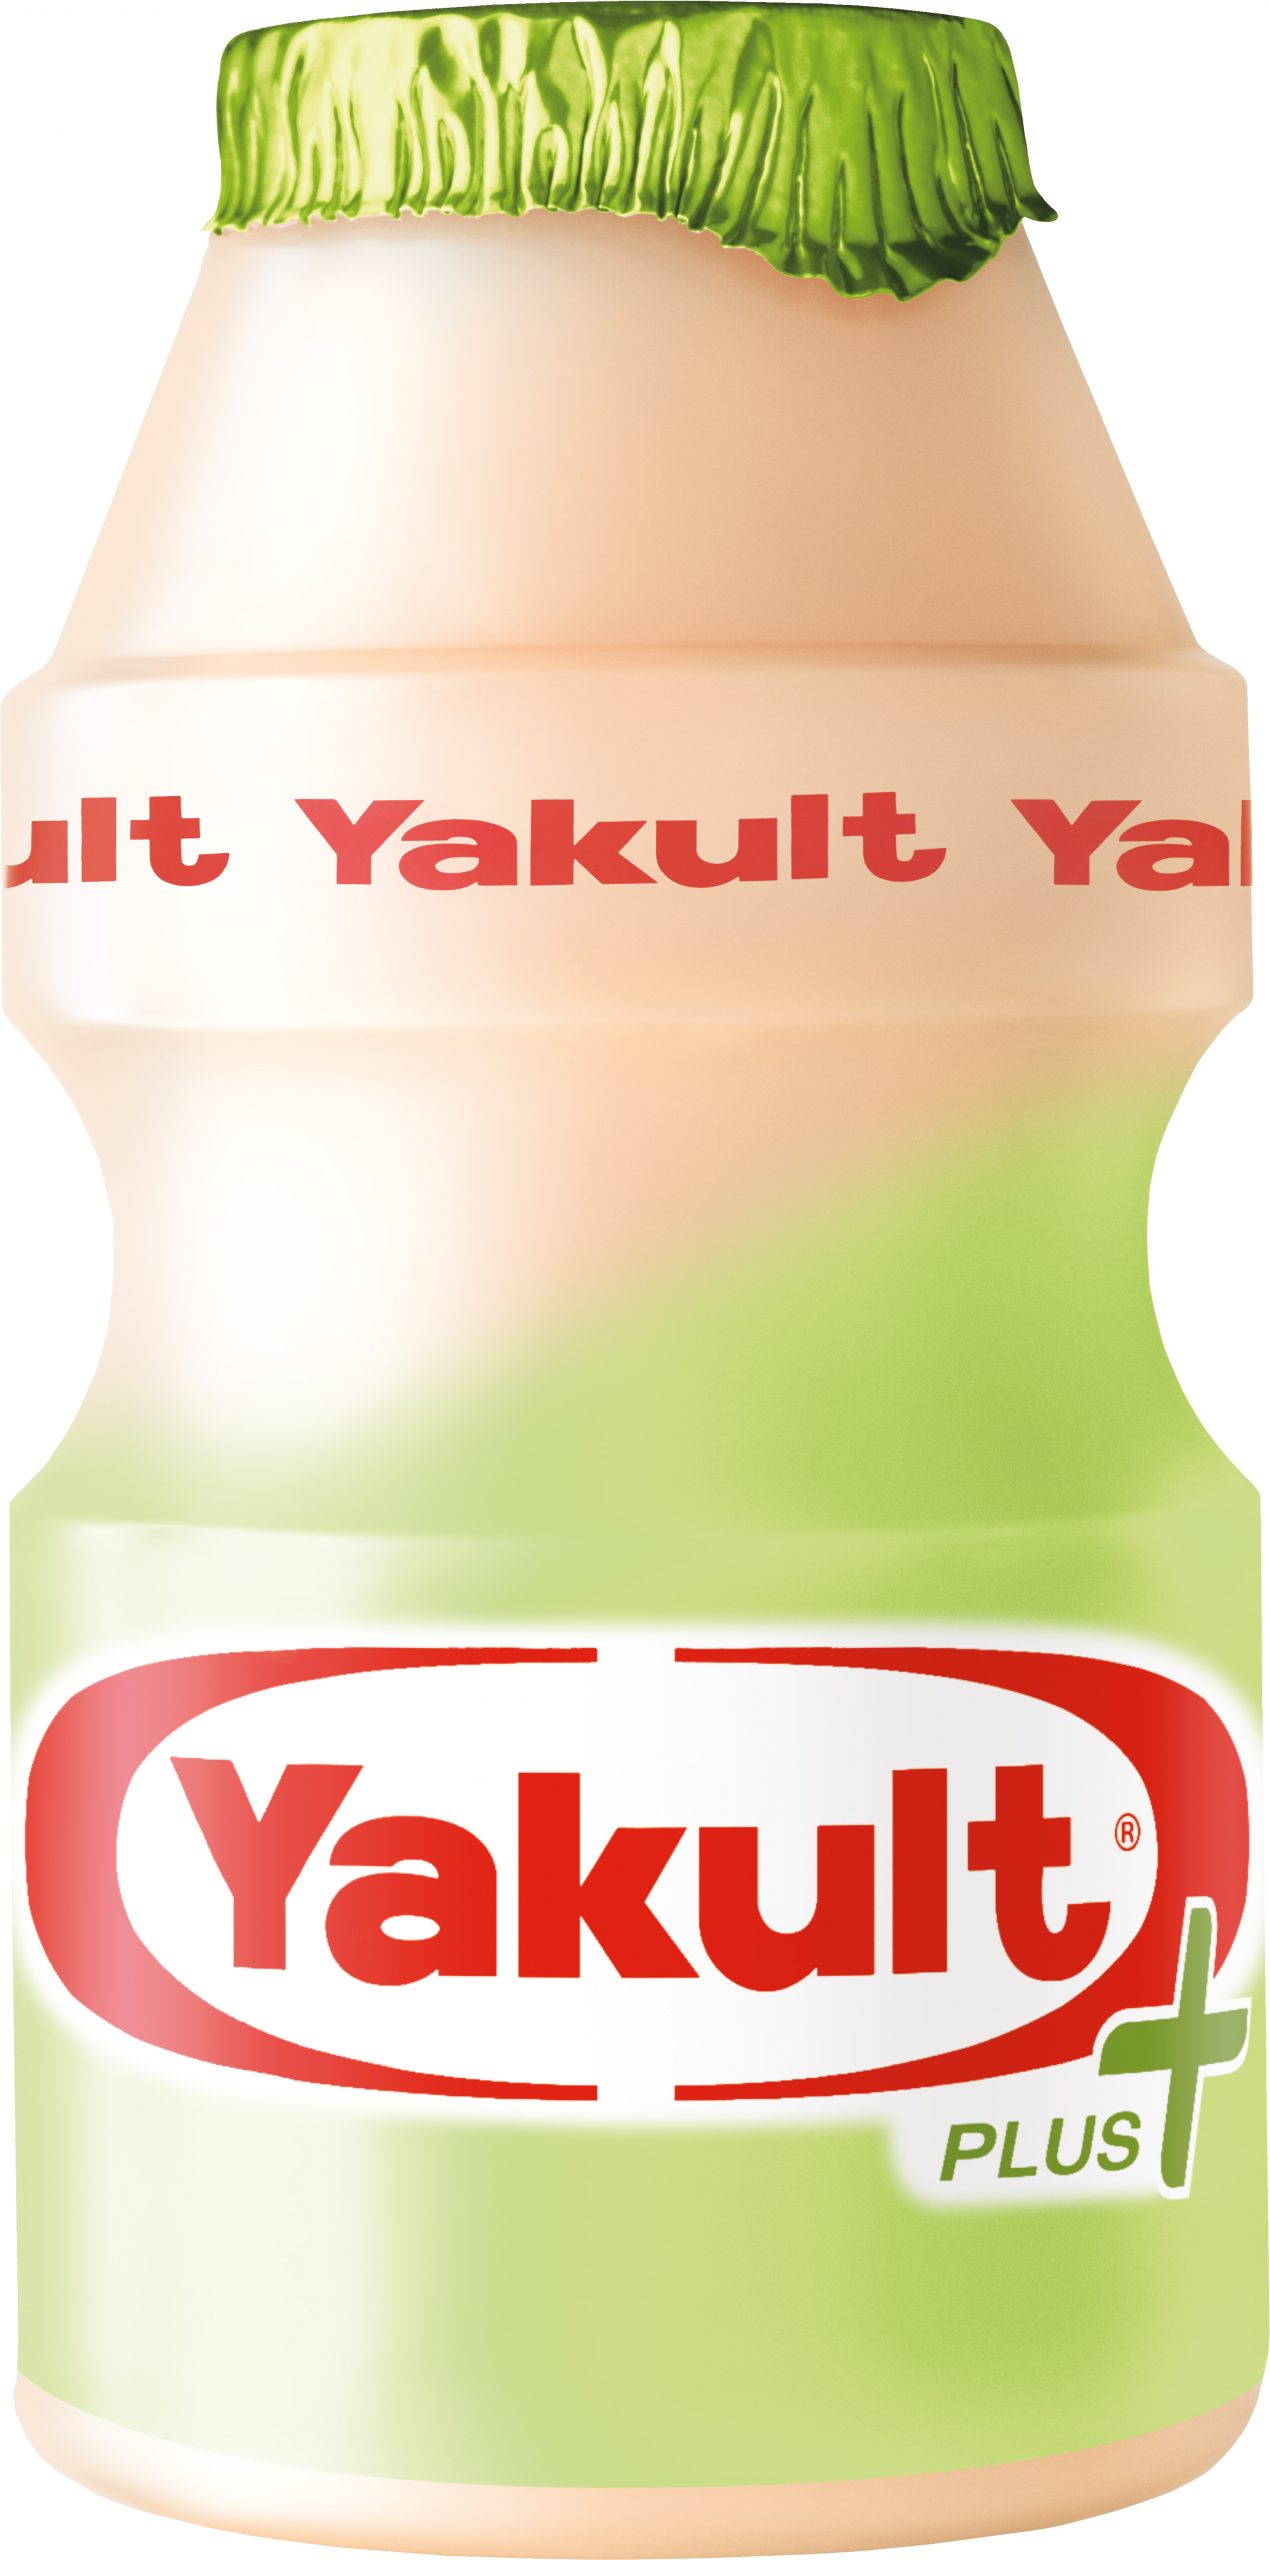 Yakult launches new rich in vitamin C Yakult Plus